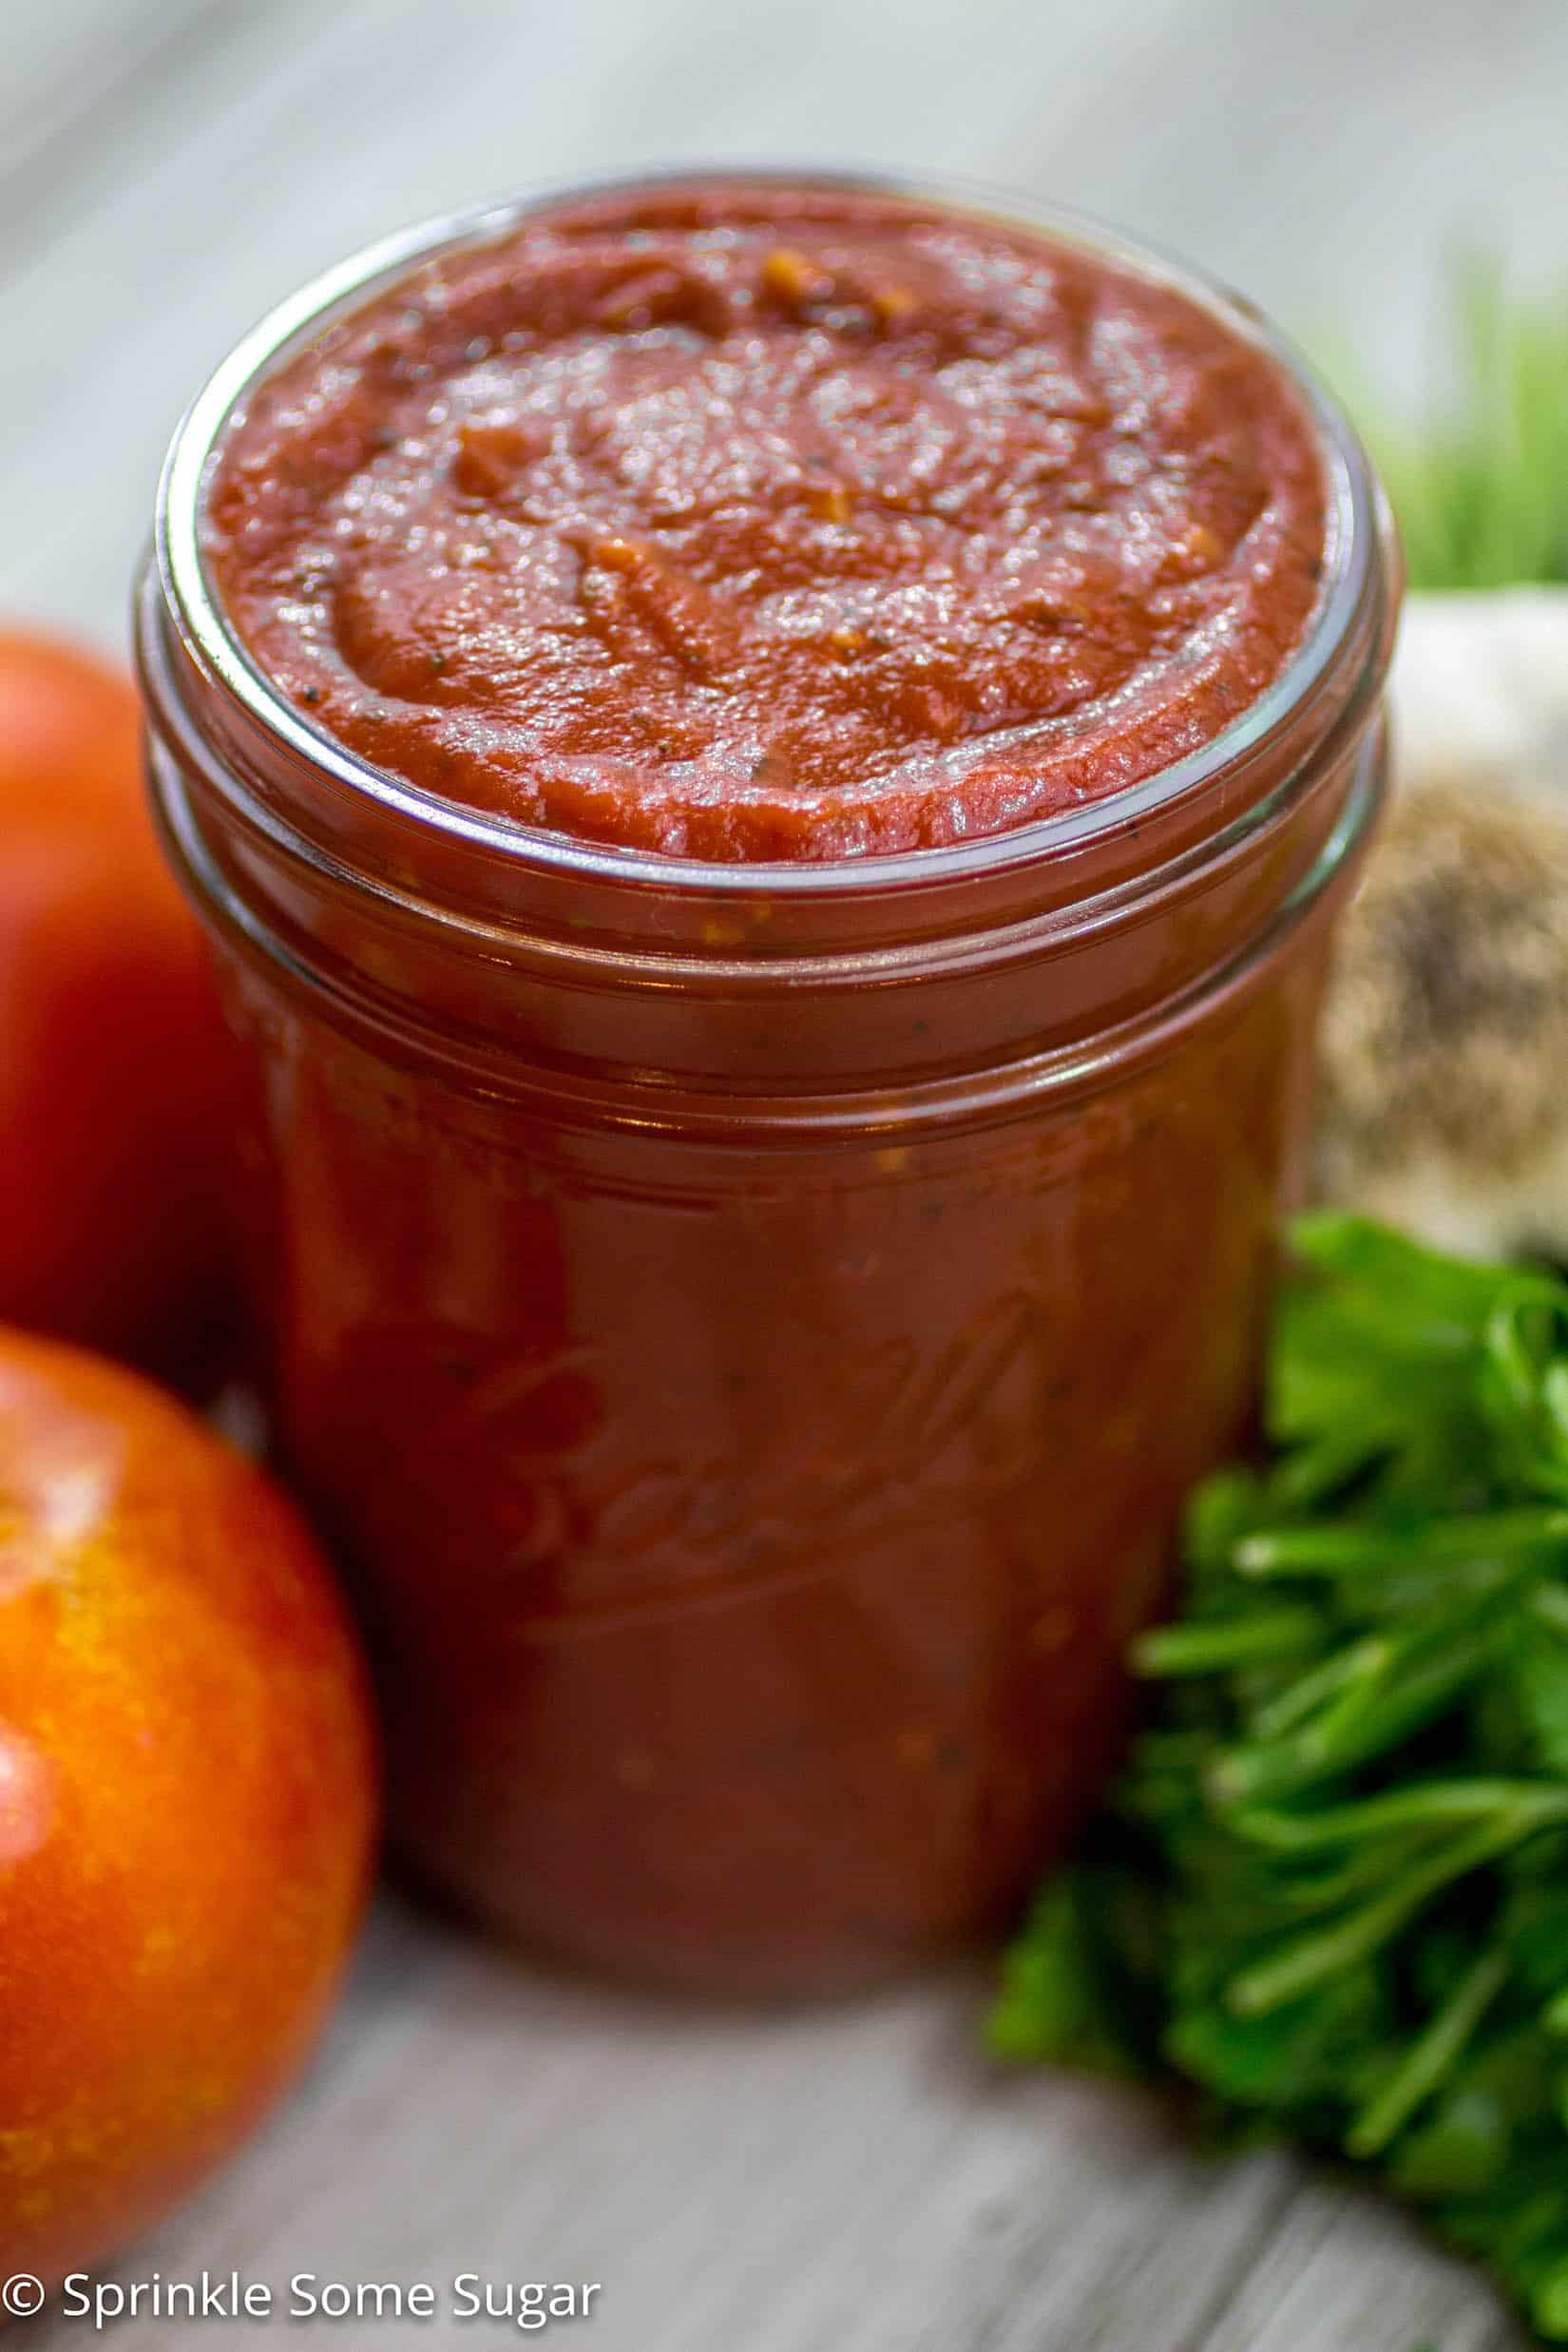 Best Pizza Sauce Recipe Best Of the Best Homemade Pizza Sauce Sprinkle some Sugar